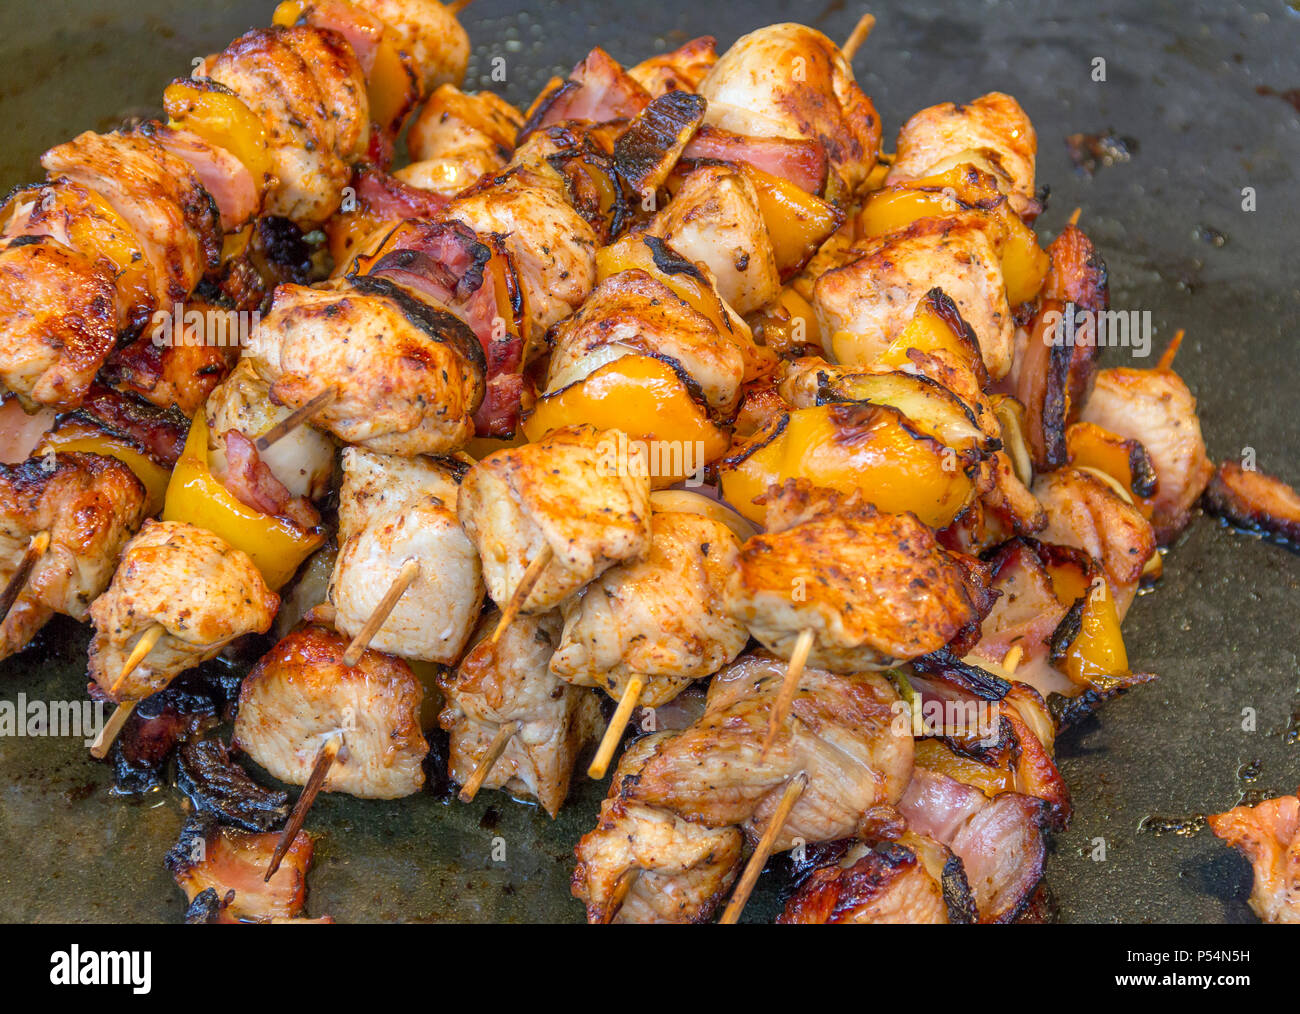 barbecue scenery with some roasted meat skewers Stock Photo